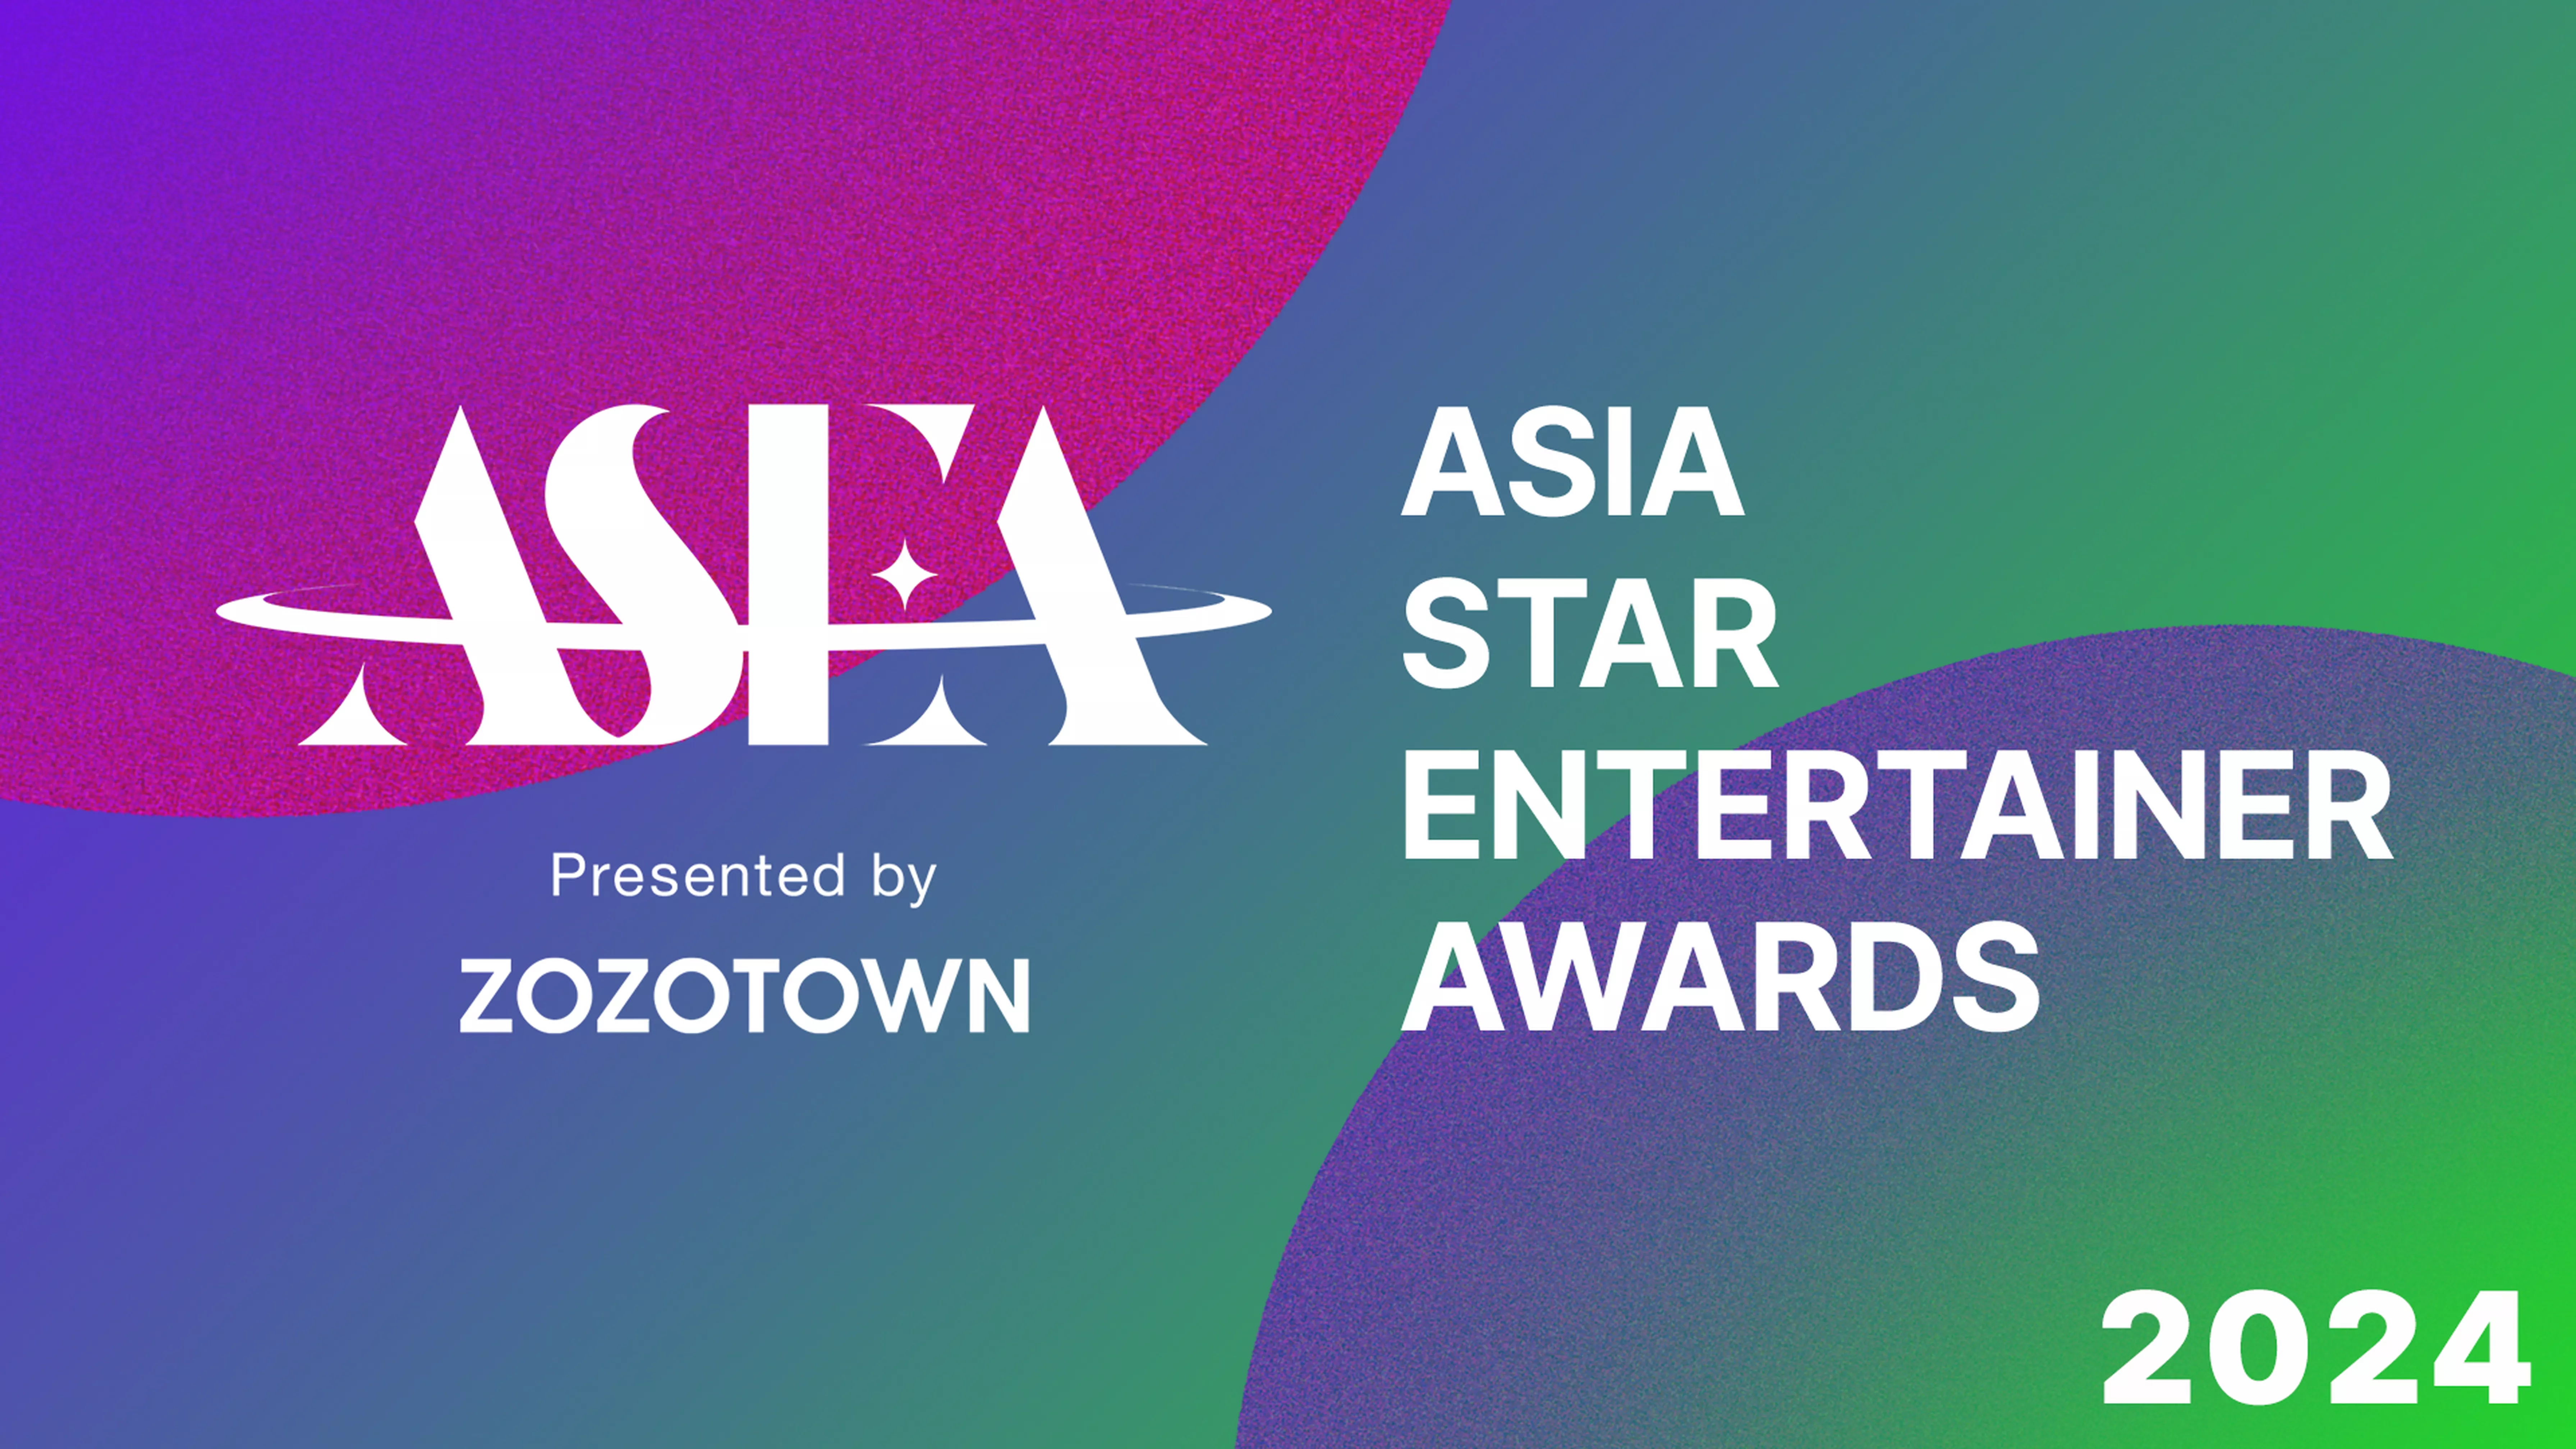 ASIA STAR ENTERTAINER AWARDS 2024 in JAPAN Presented by ZOZOTOWN